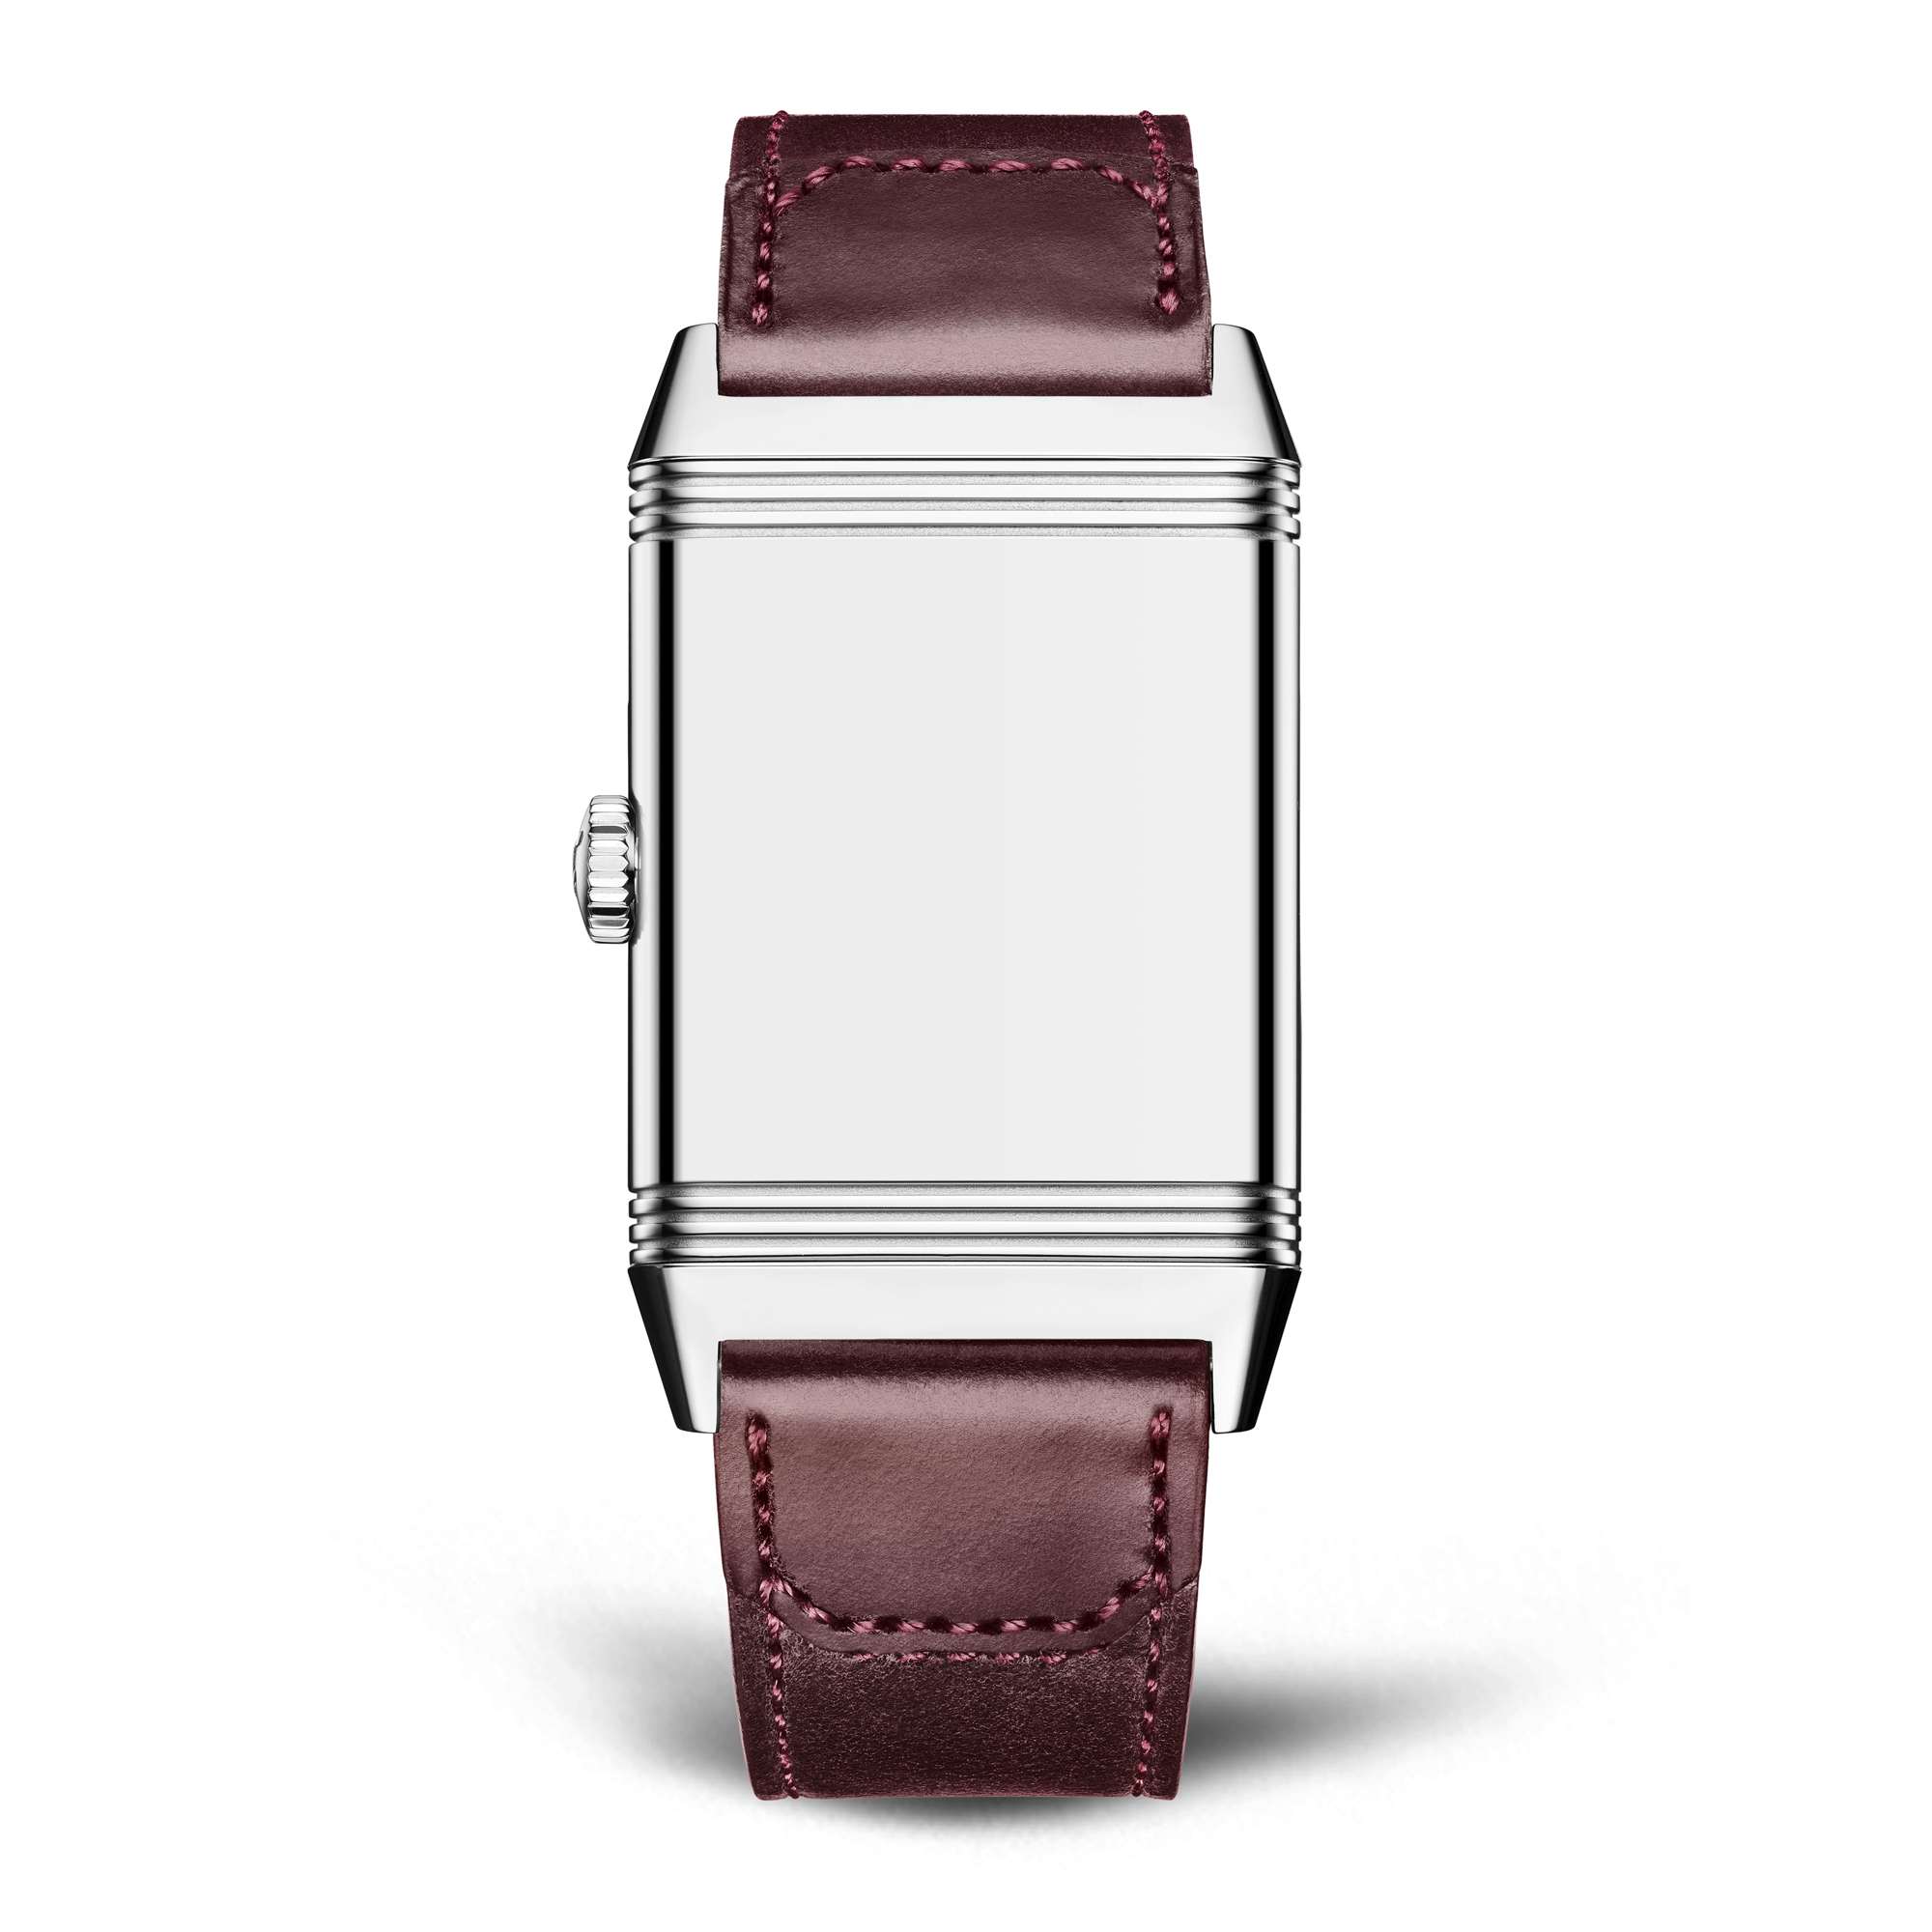 The other face of the Reverso is blank and offers the wearer the option to fully customise the space.